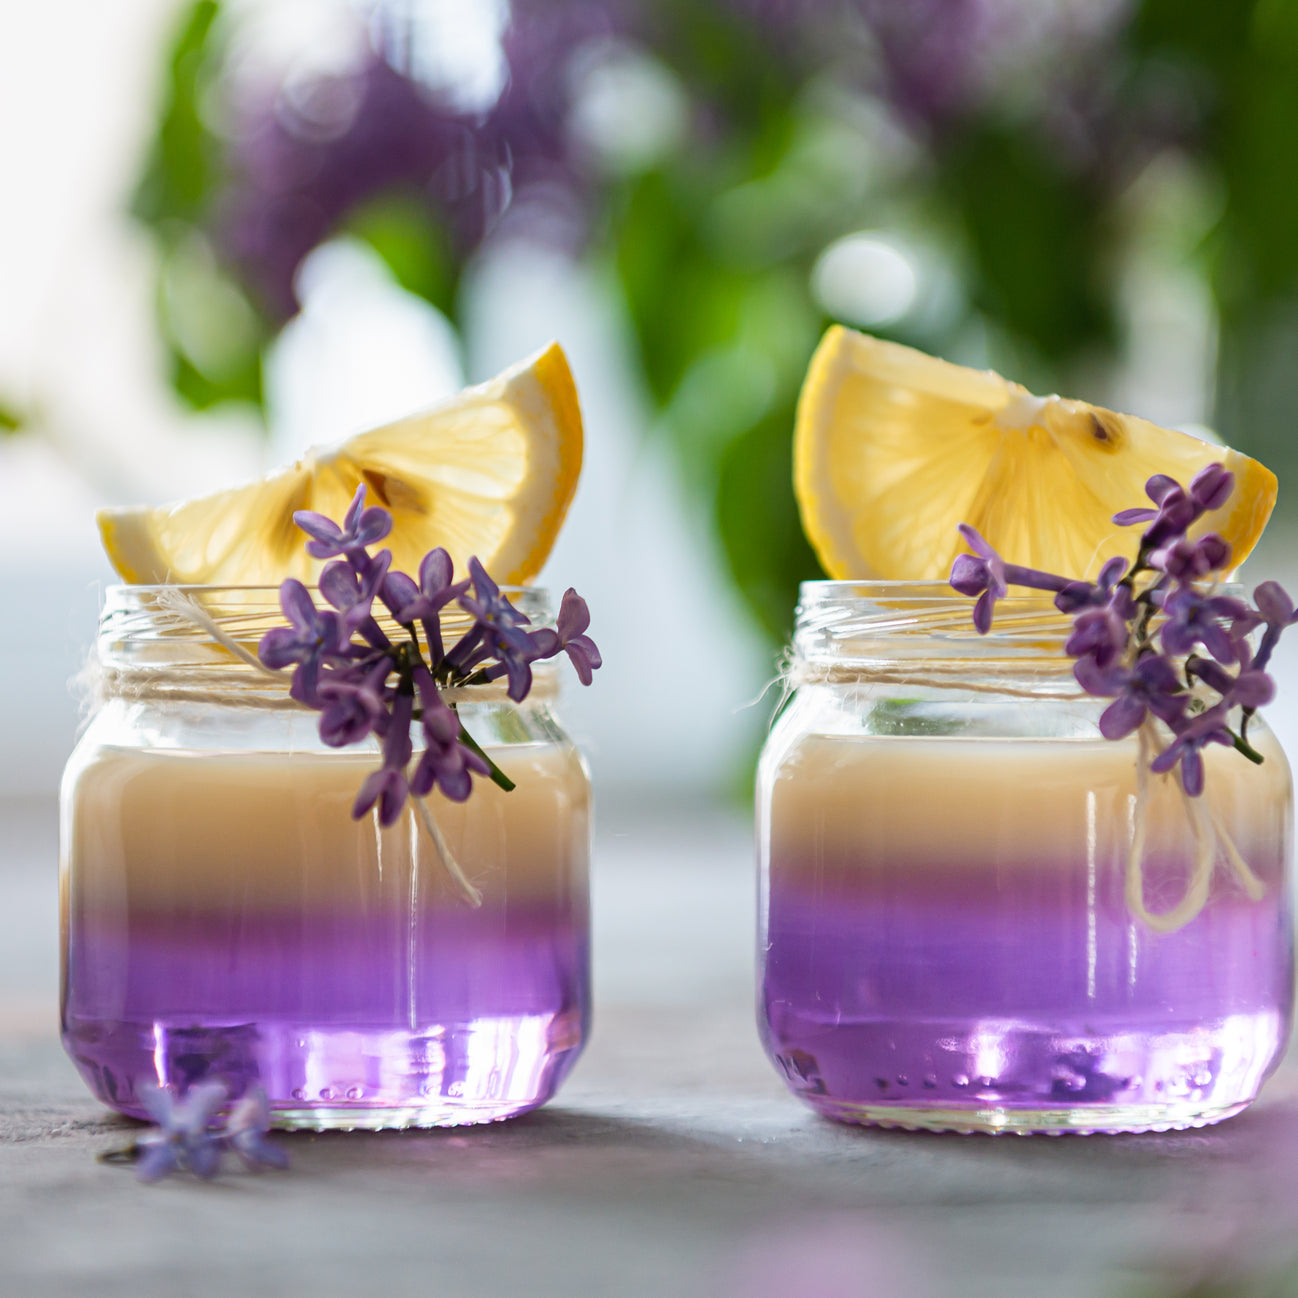 Photo <a href="https://www.dreamstime.com/alcoholic-shot-cocktails-vanilla-liqour-tiny-jars-gray-concrete-background-summer-party-drinks-lilac-bar-menu-image186500104">186500104</a> © <a href="https://www.dreamstime.com/dina160987_info" itemprop="author">